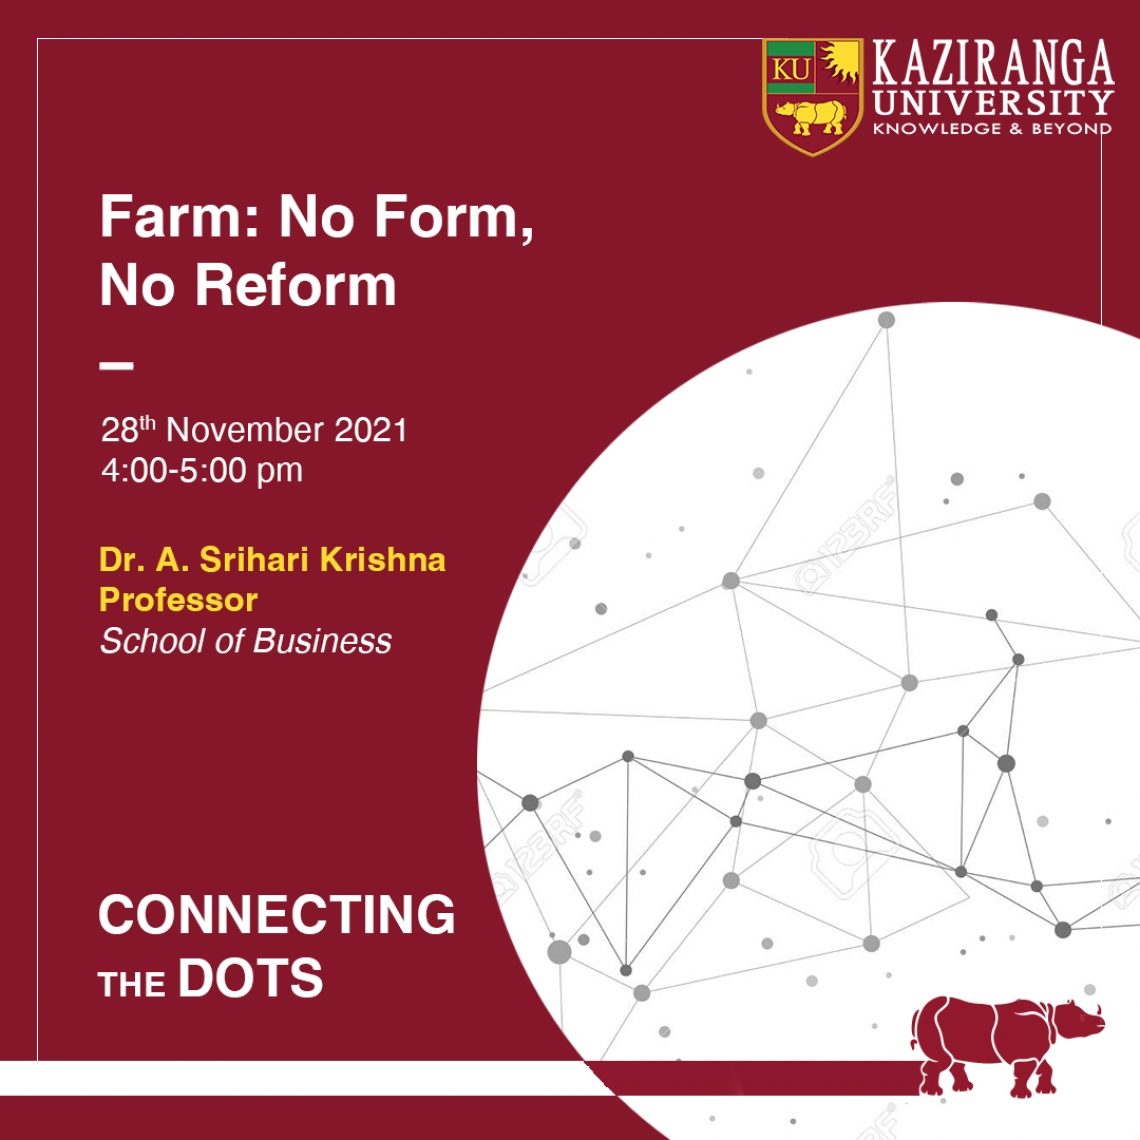 Connecting the Dots weekend Webinar on Farm, No form, No reform.